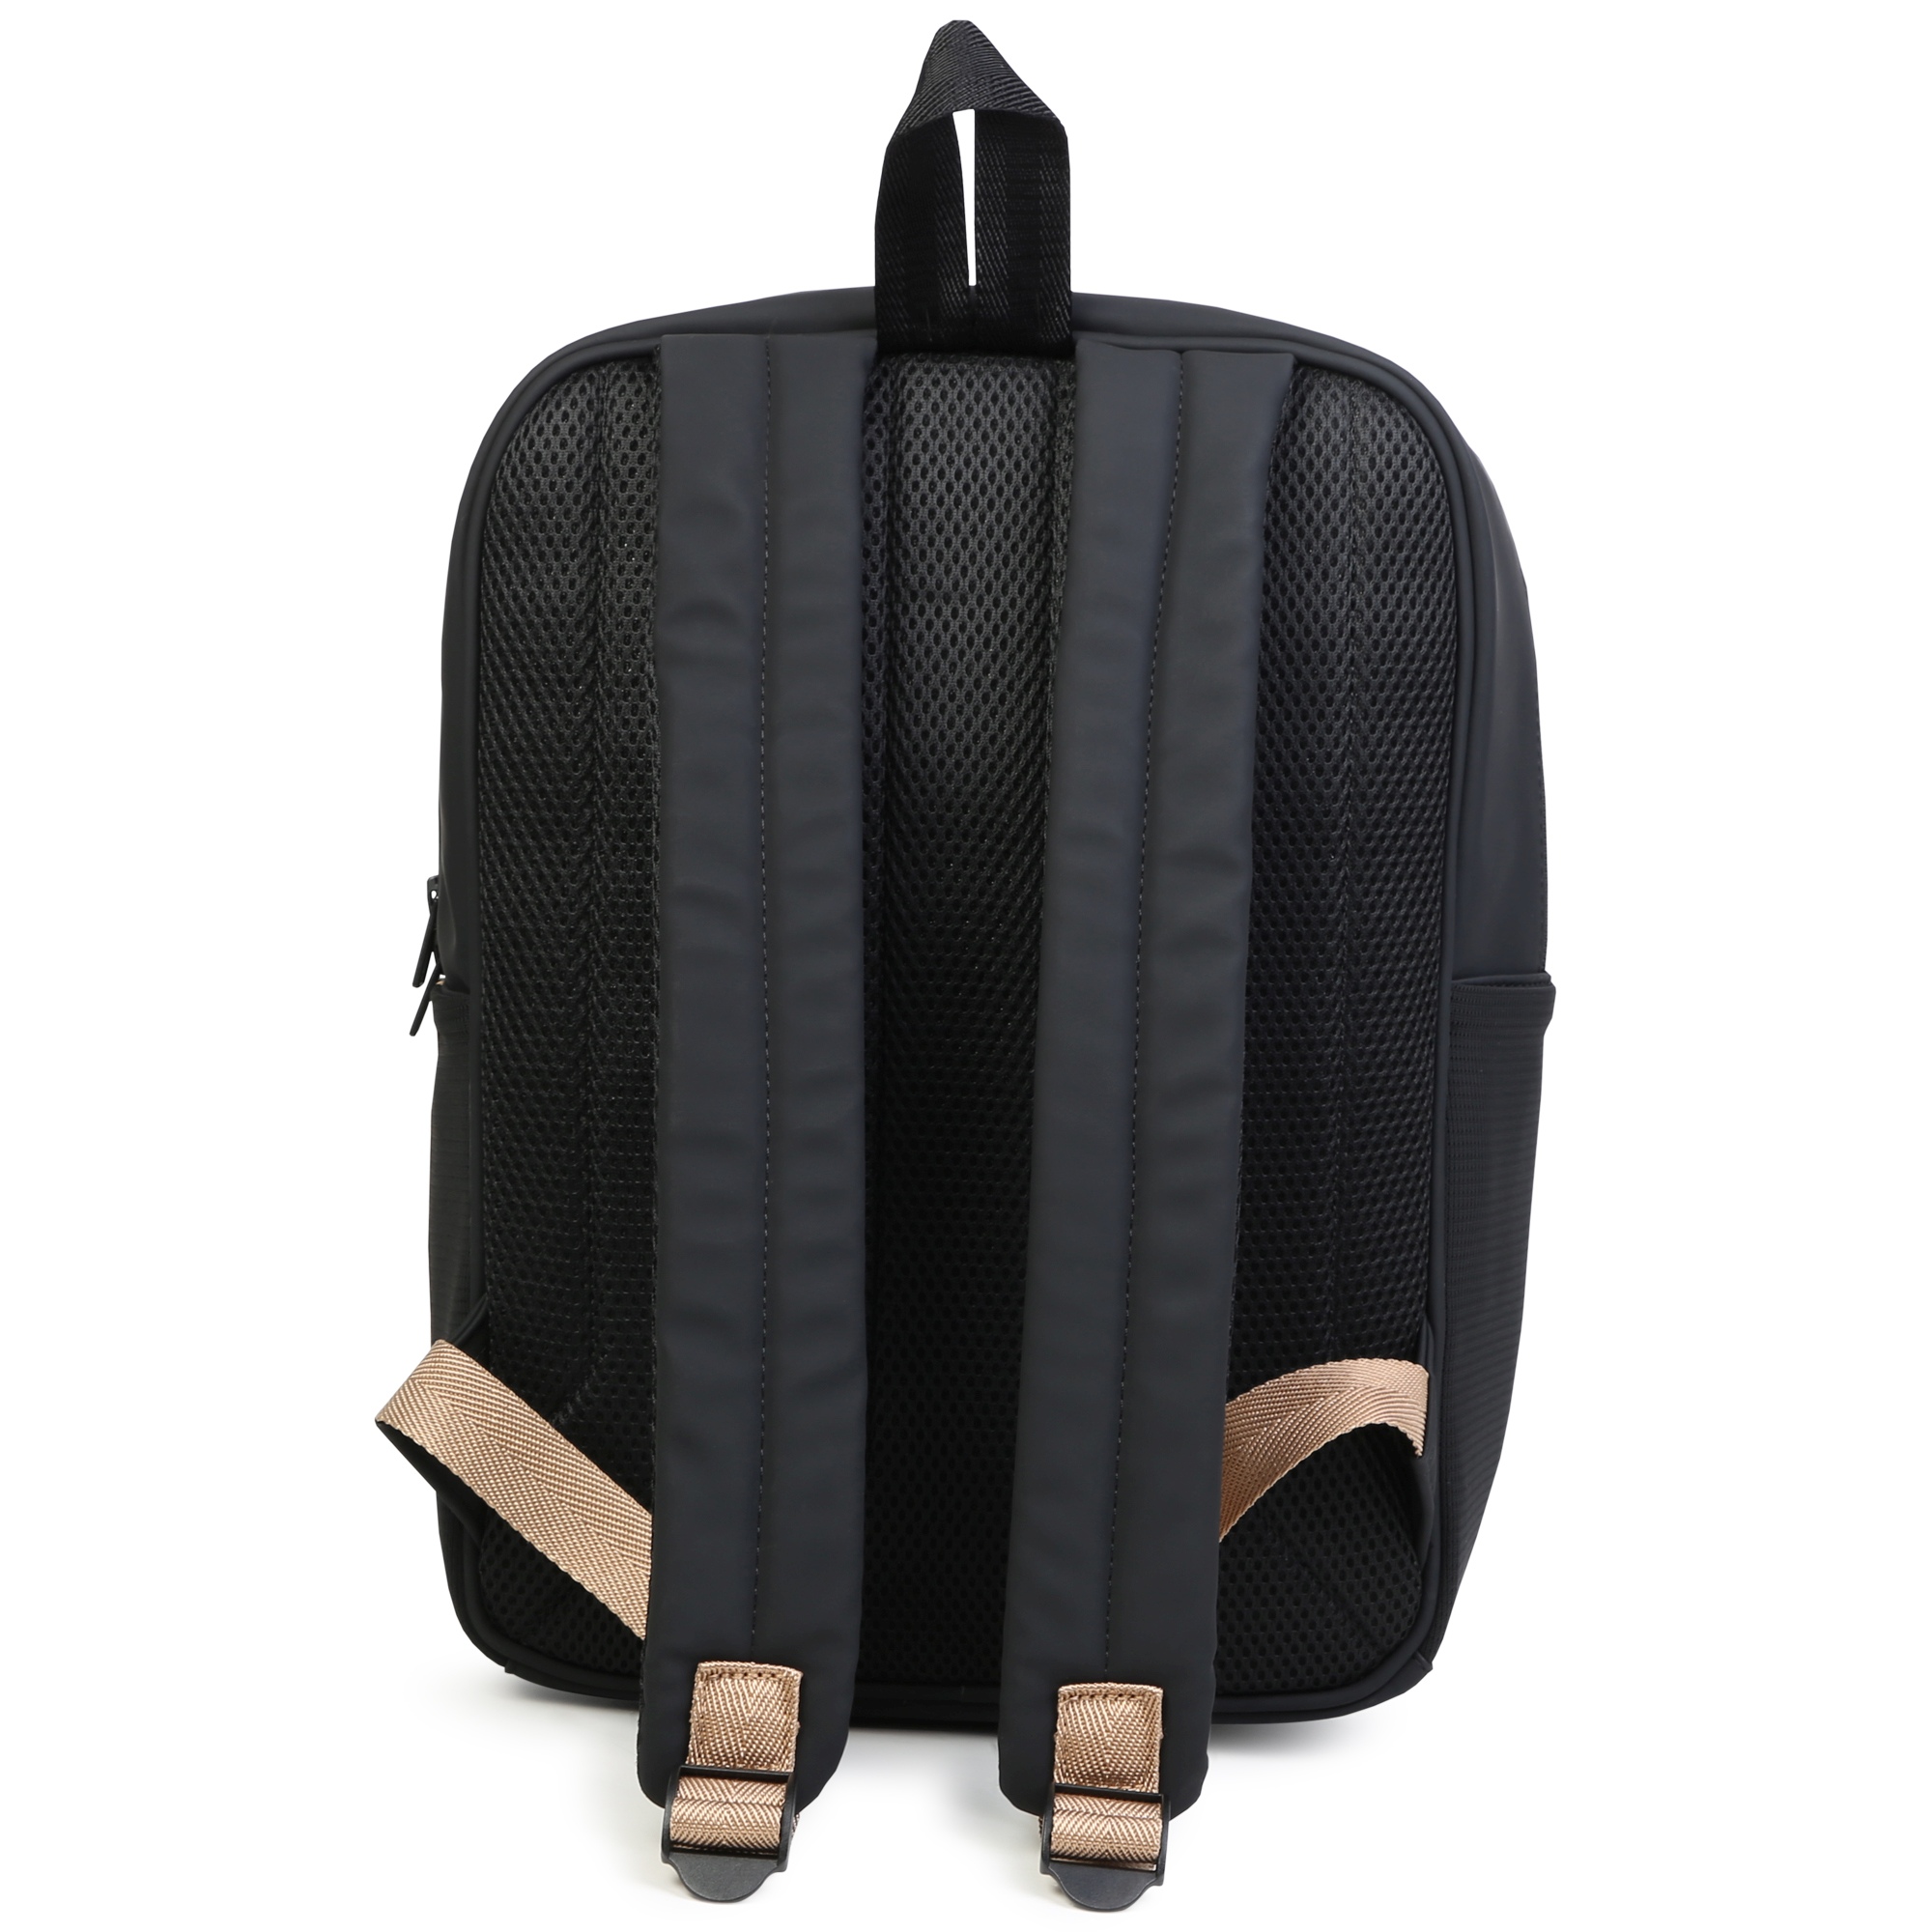 Coated fabric backpack BOSS for BOY